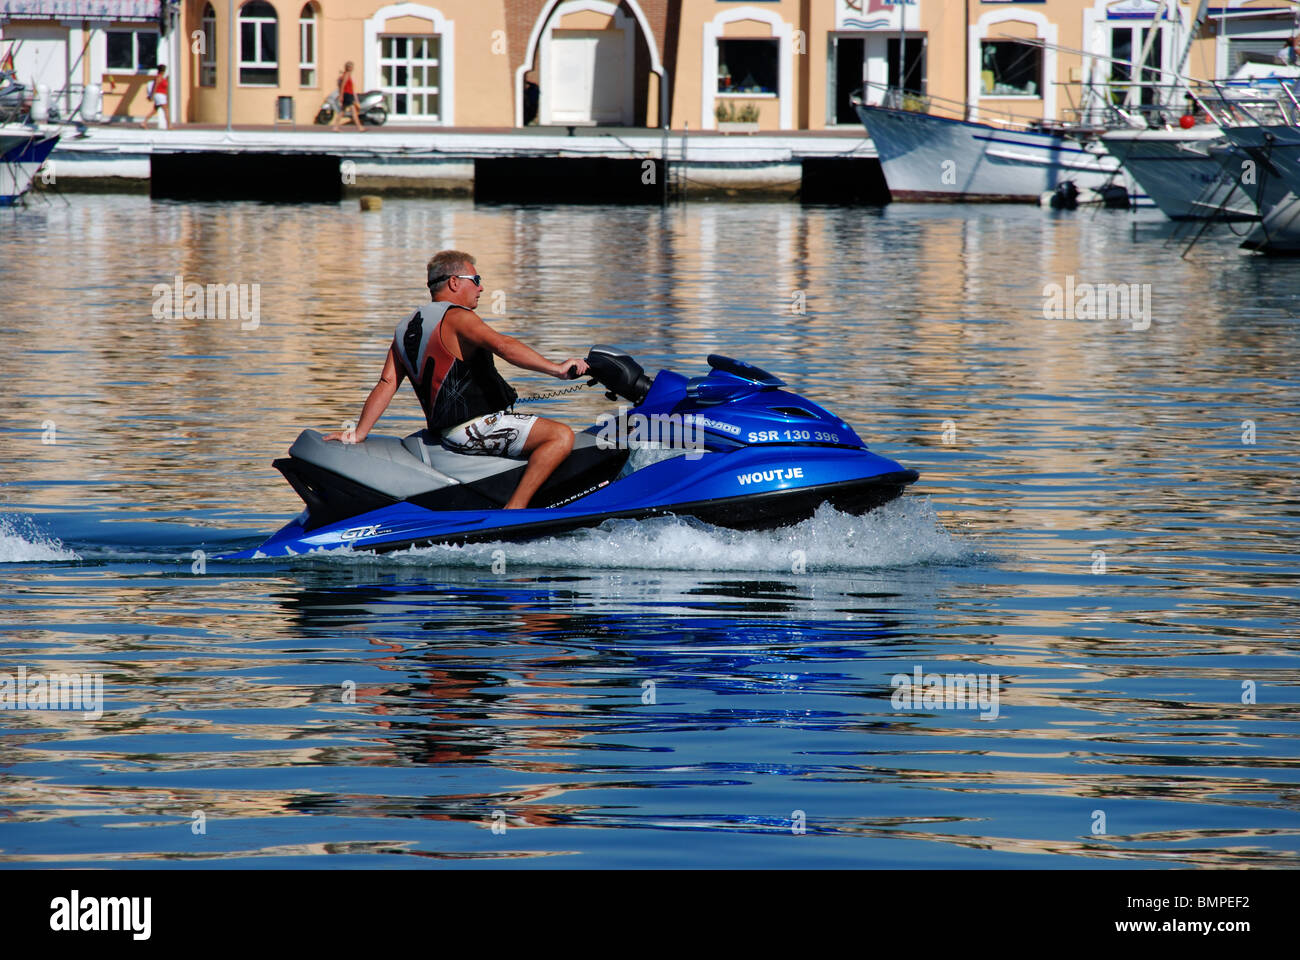 Jet Skier In The Harbour Fuengirola Costa Del Sol Malaga Province Andalucia Spain Western Europe BMPEF2 